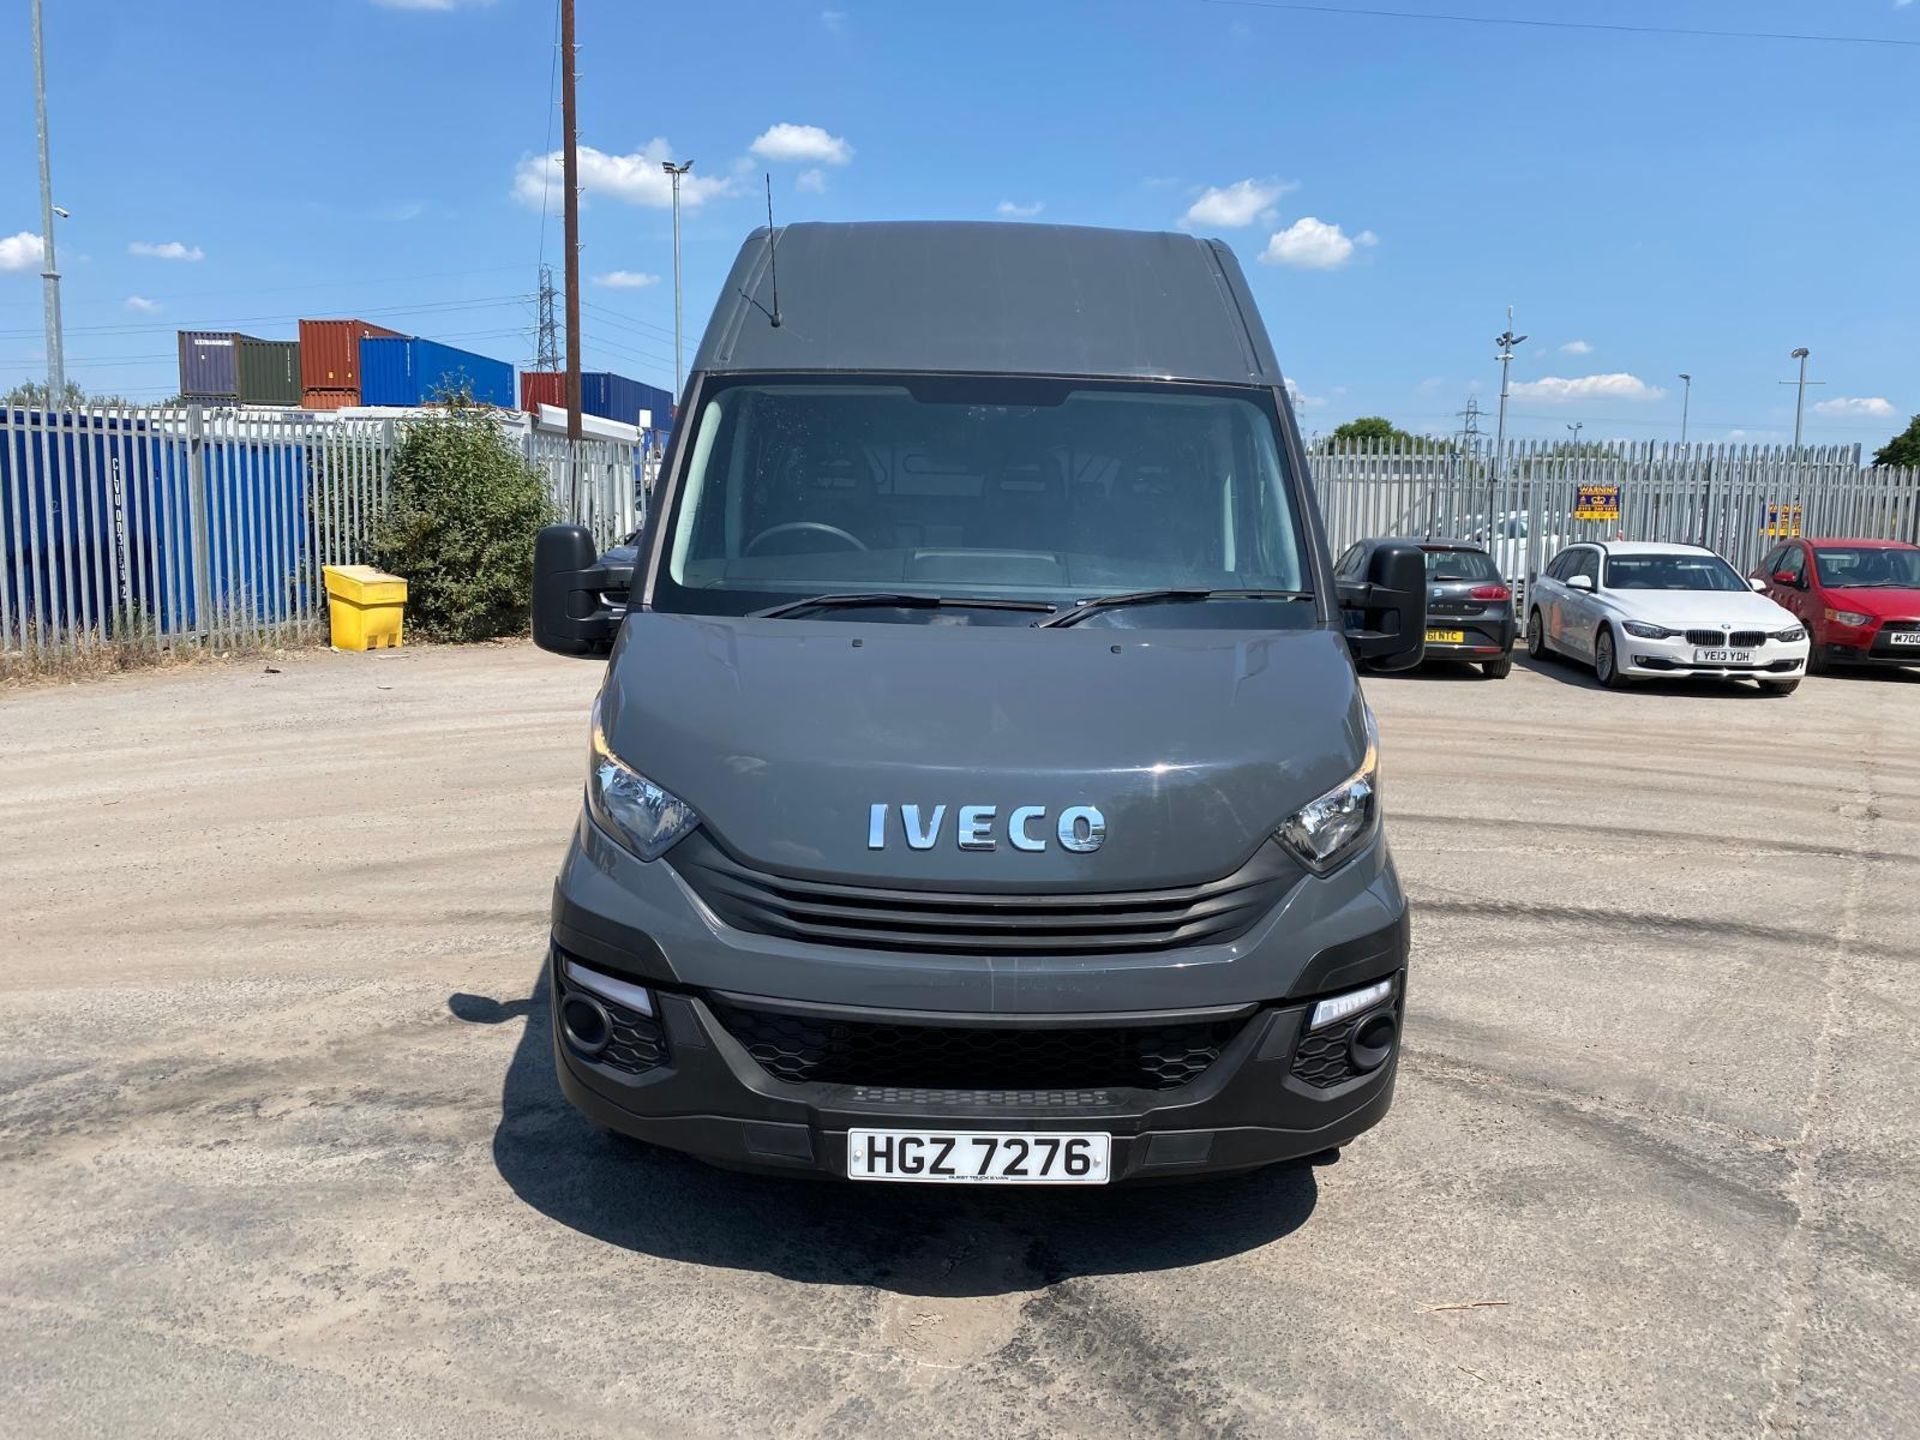 2017 67 IVECO DAILY 35S120 MWB EURO6 ONLY 49200 GUARANTEED MILES AIR CONDITIONIN - Bild 2 aus 12